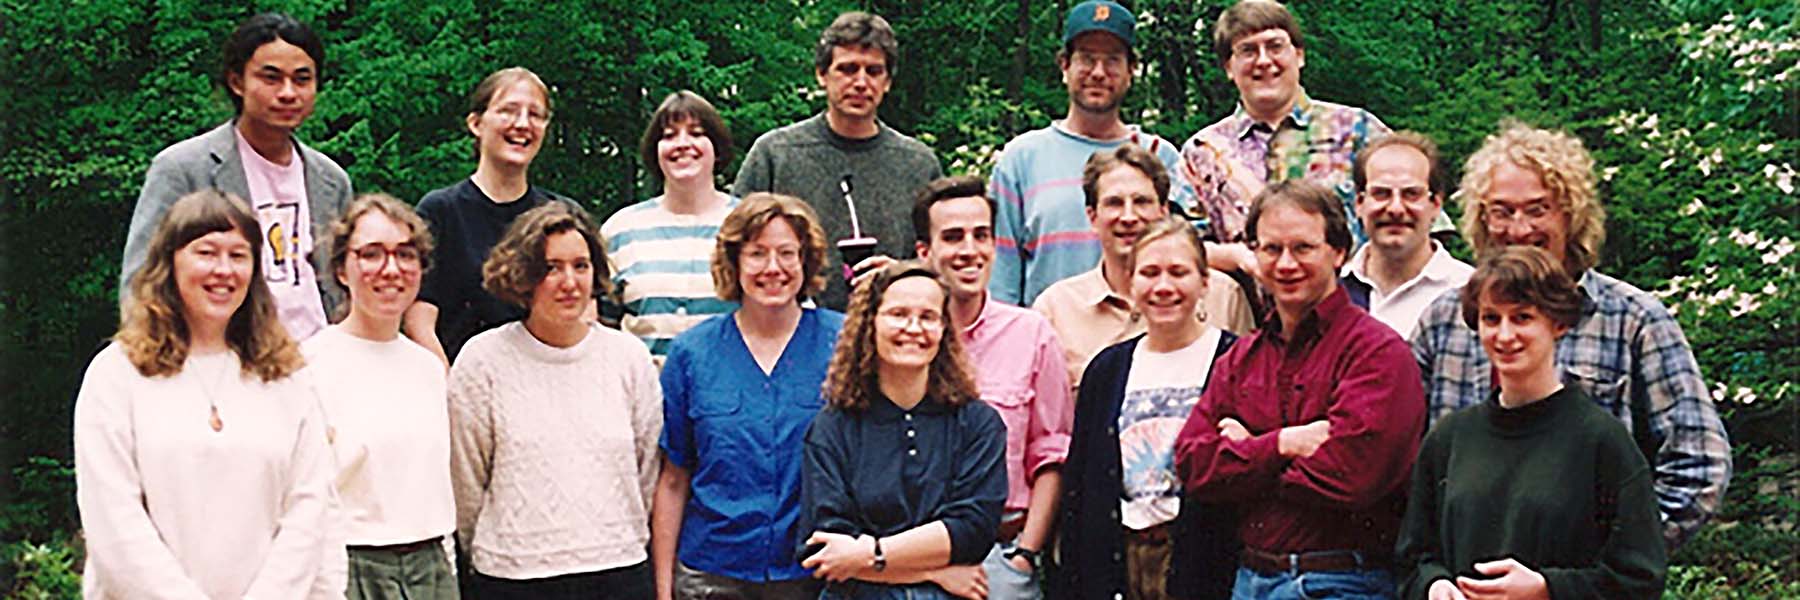 Members of Curt Lively and Lynda Delph's labs sometime during the 1990s in the Department of Biology at Indiana University Bloomington.